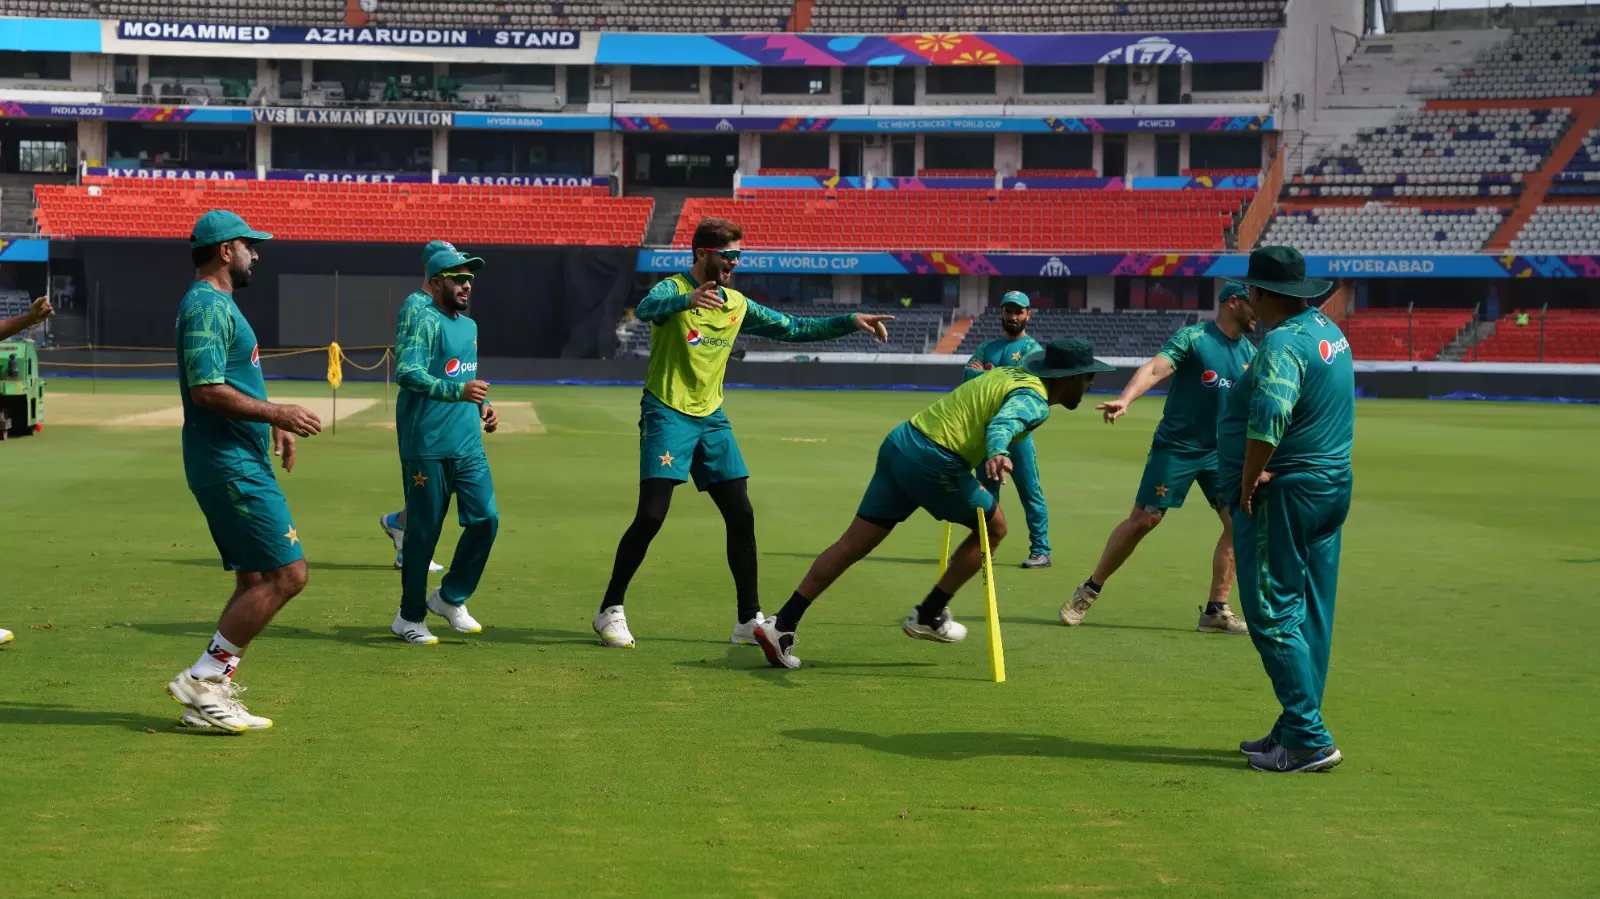 World Cup: Hyderabad Police working overtime to ensure full safety, security for Pakistan team